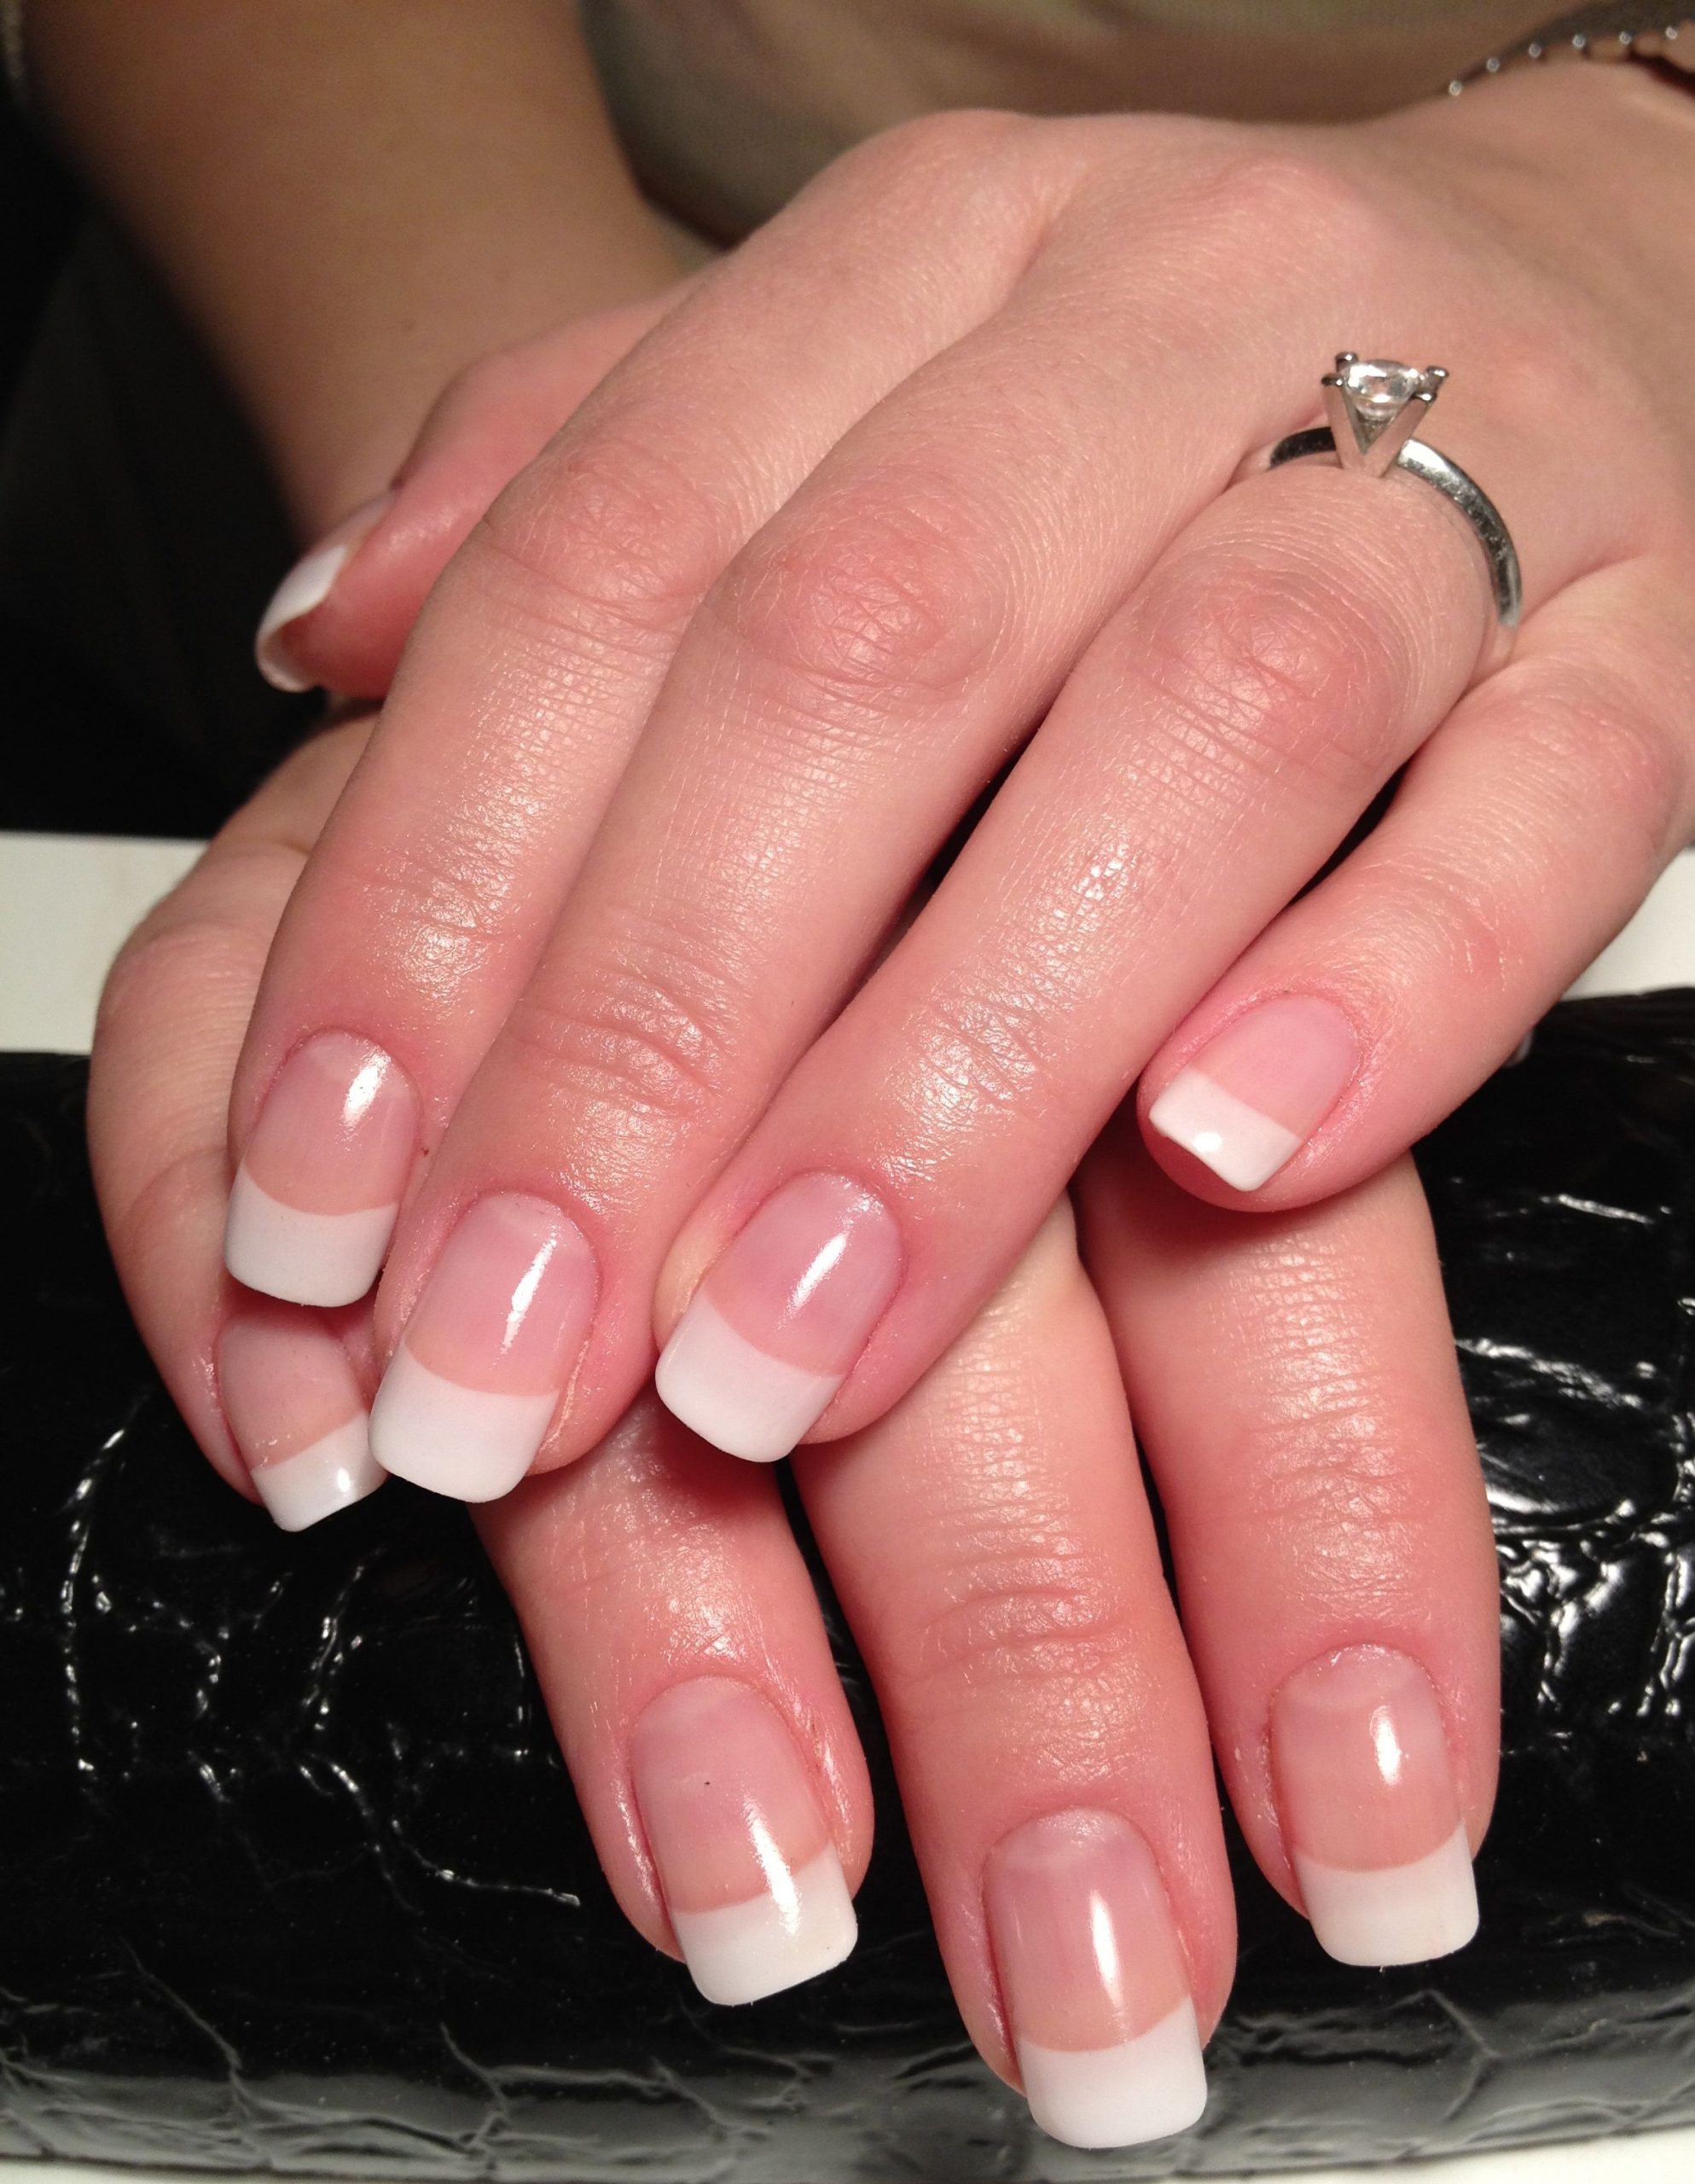 natural looking acrylic nails. Not too long, not too square. Perfect ...